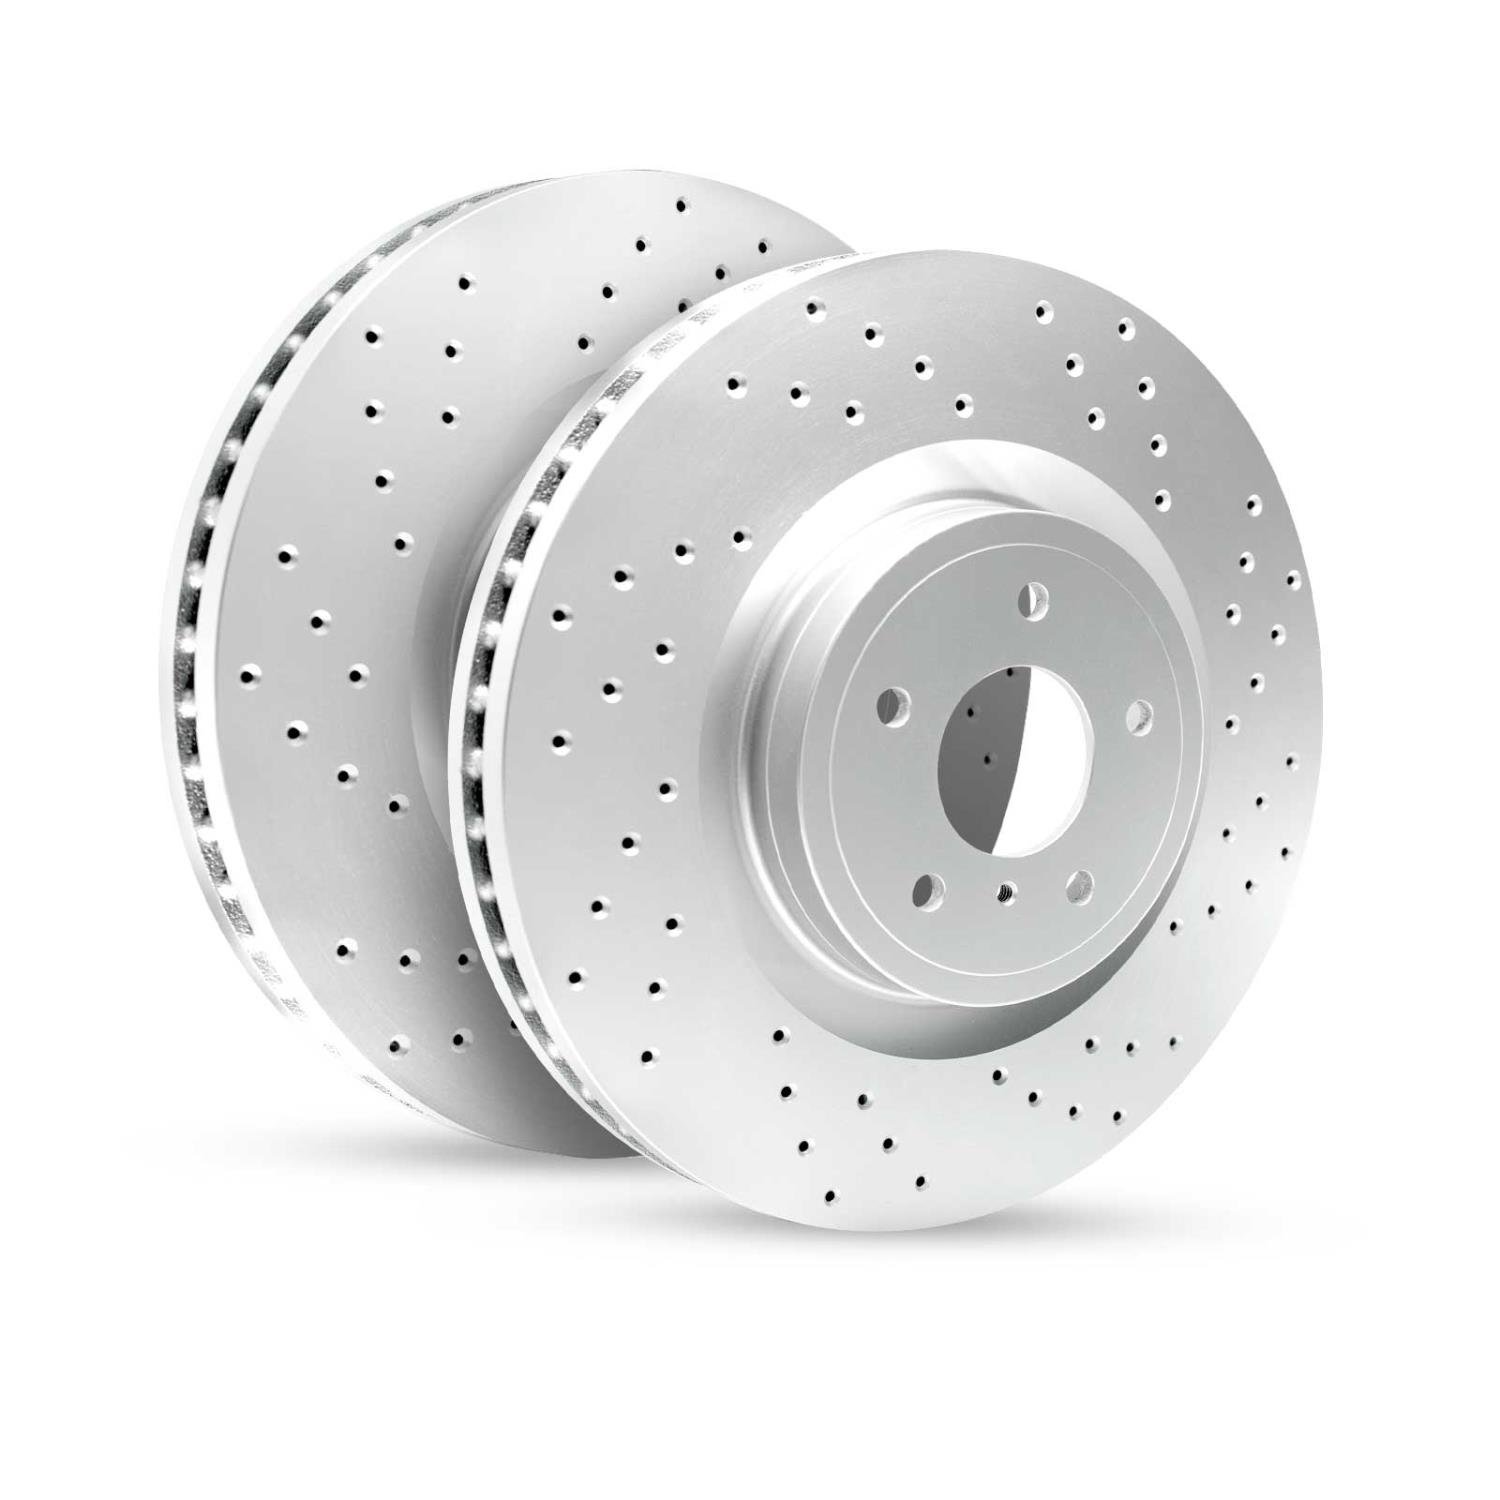 GEO-Carbon Drilled/Slotted Rotors, 1995-2003 BMW, Position: Rear